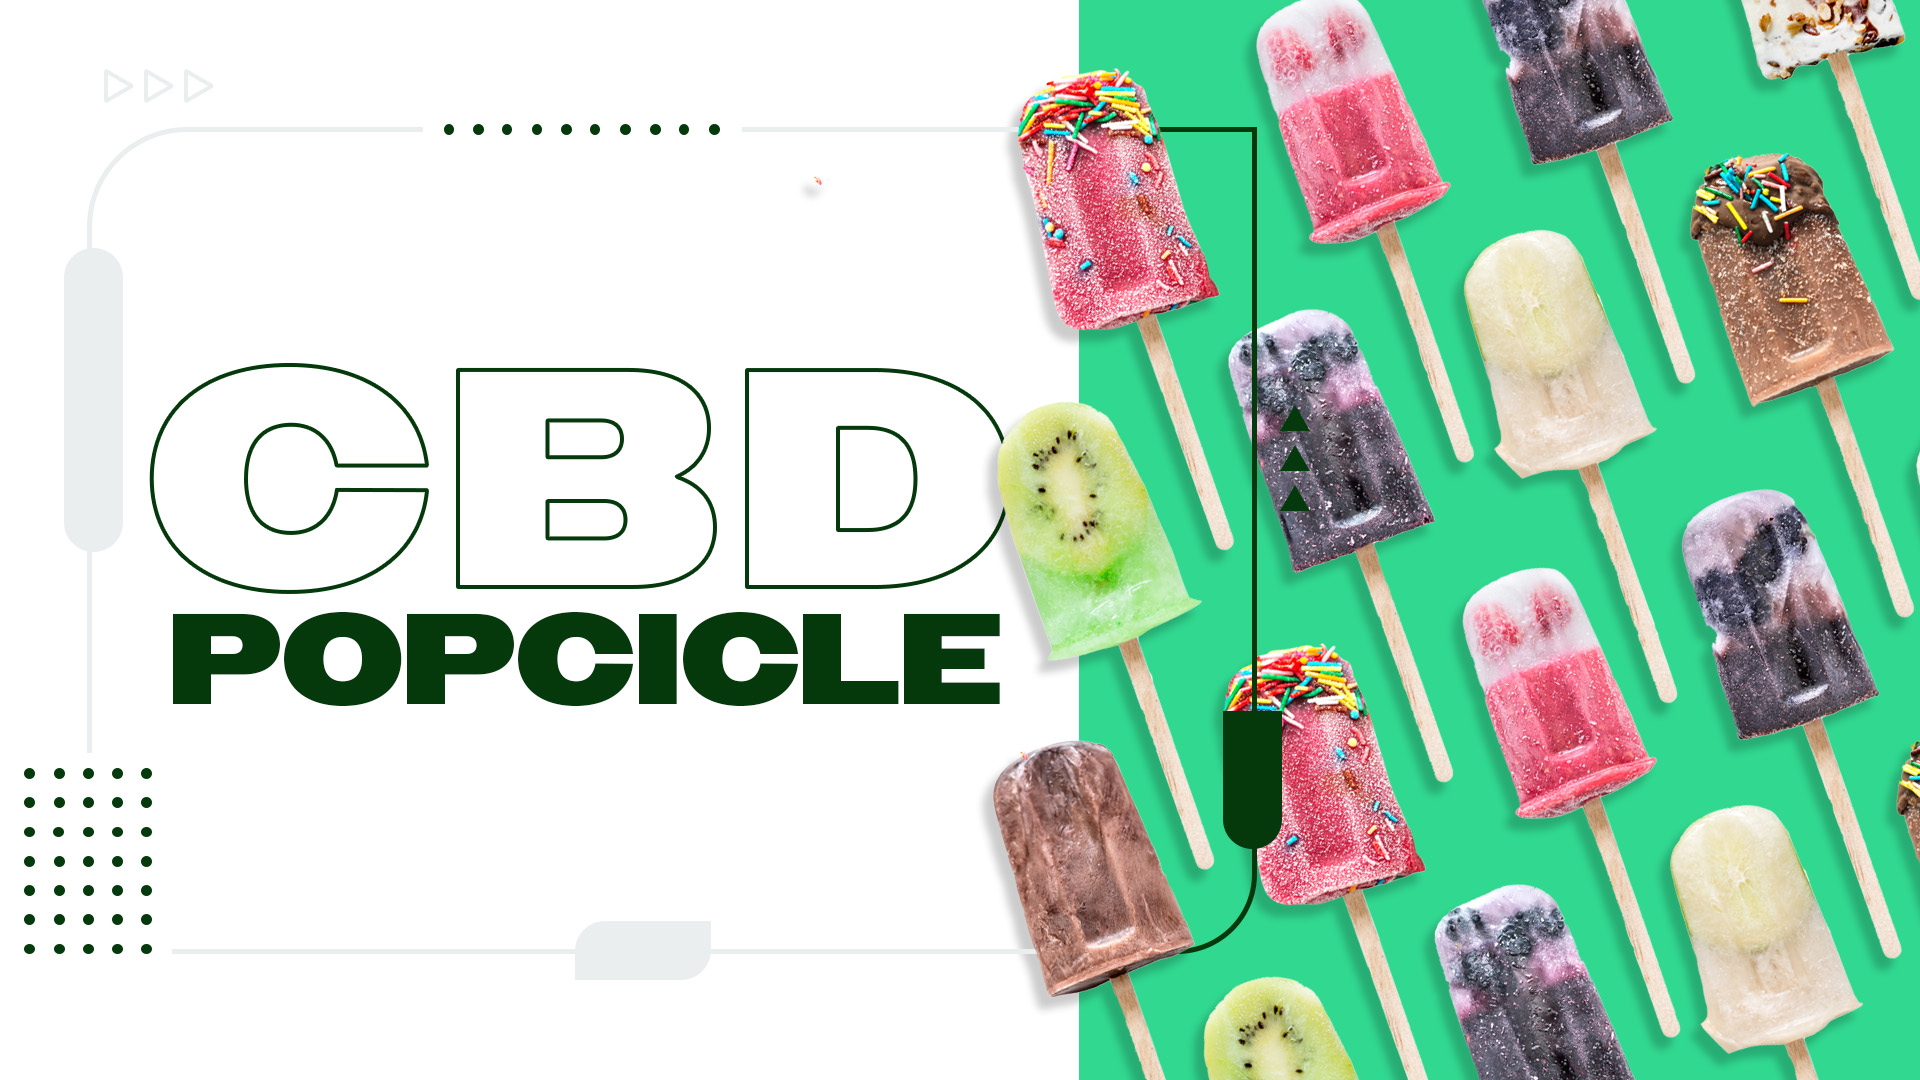 How To Make CBD Popsicles: Step-By-Step Guide